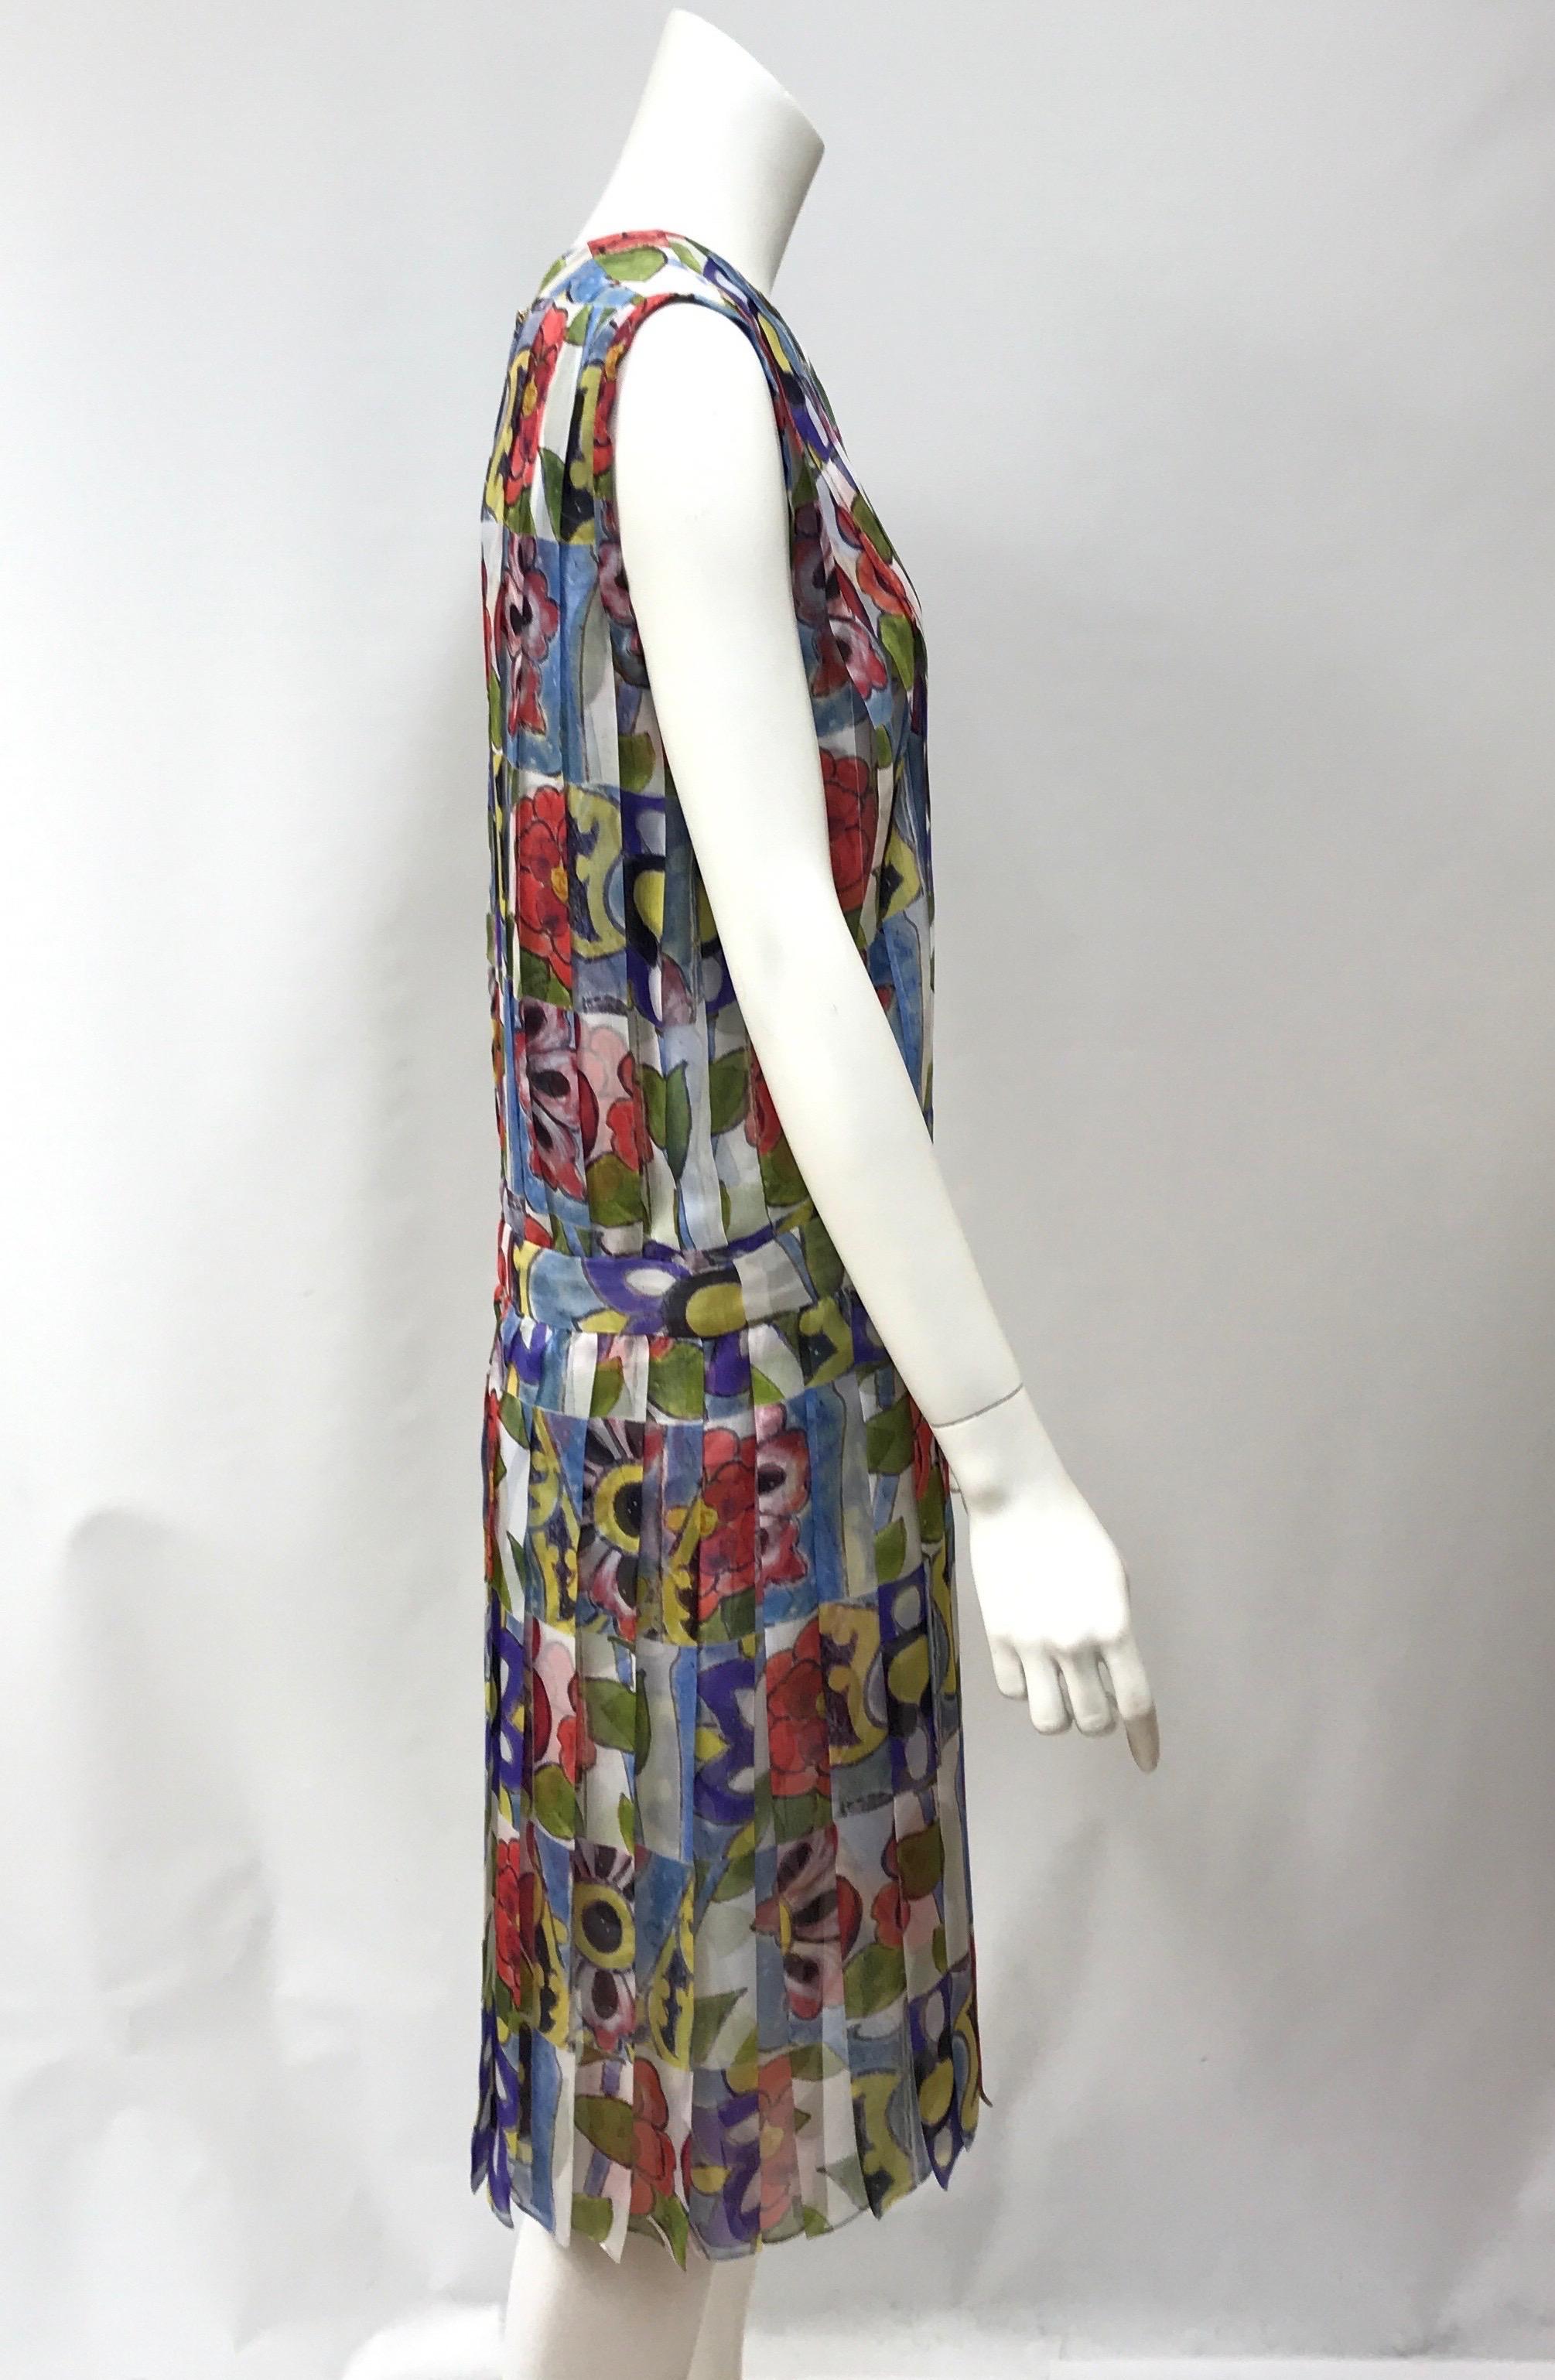 Chanel Multi Color Silk Floral Print Dress w/ Tucks-42. This beautiful Chanel dress is in excellent condition. There is no sign of use. It is made of 100% silk and has a colorful floral print throughout. The dress has no sleeves and zips up in the